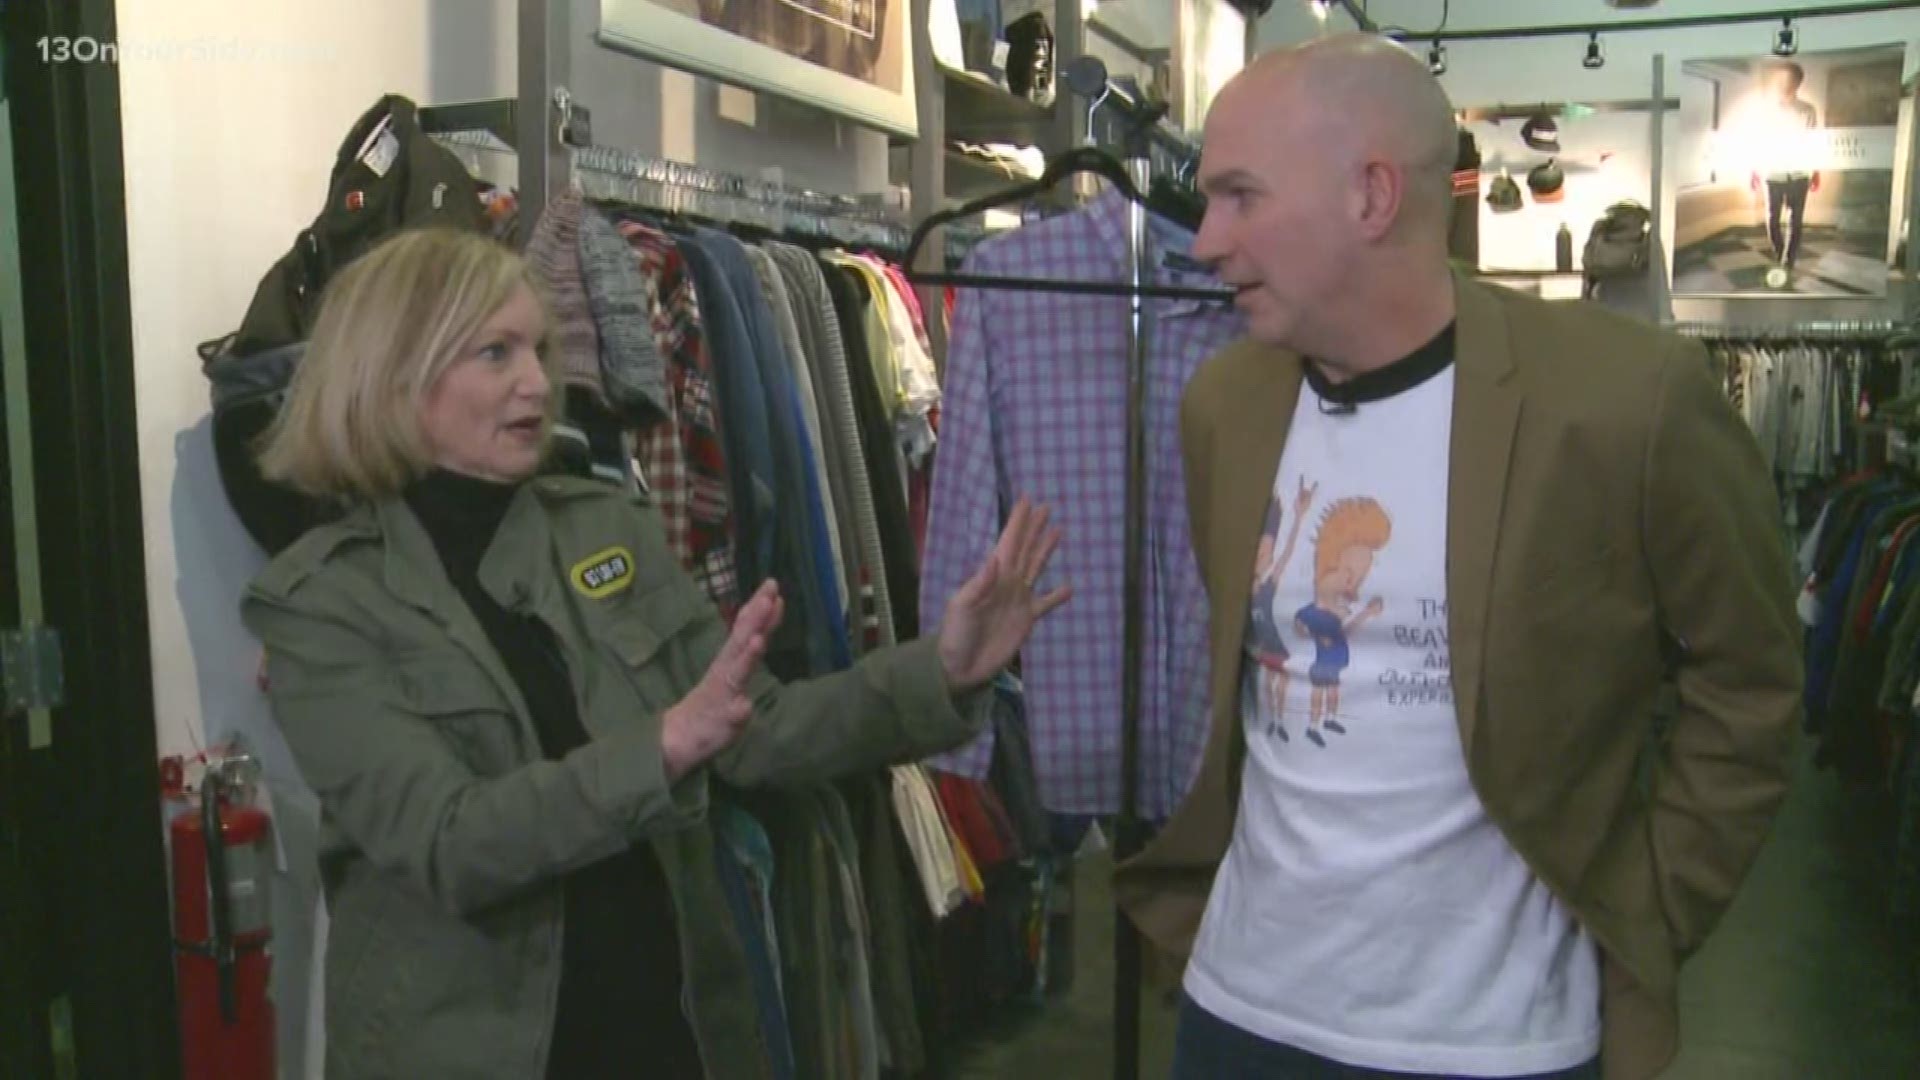 WLAV's Michelle McKormick gives 13 ON YOUR SIDE's Dave Kaechele a thrift makeover.